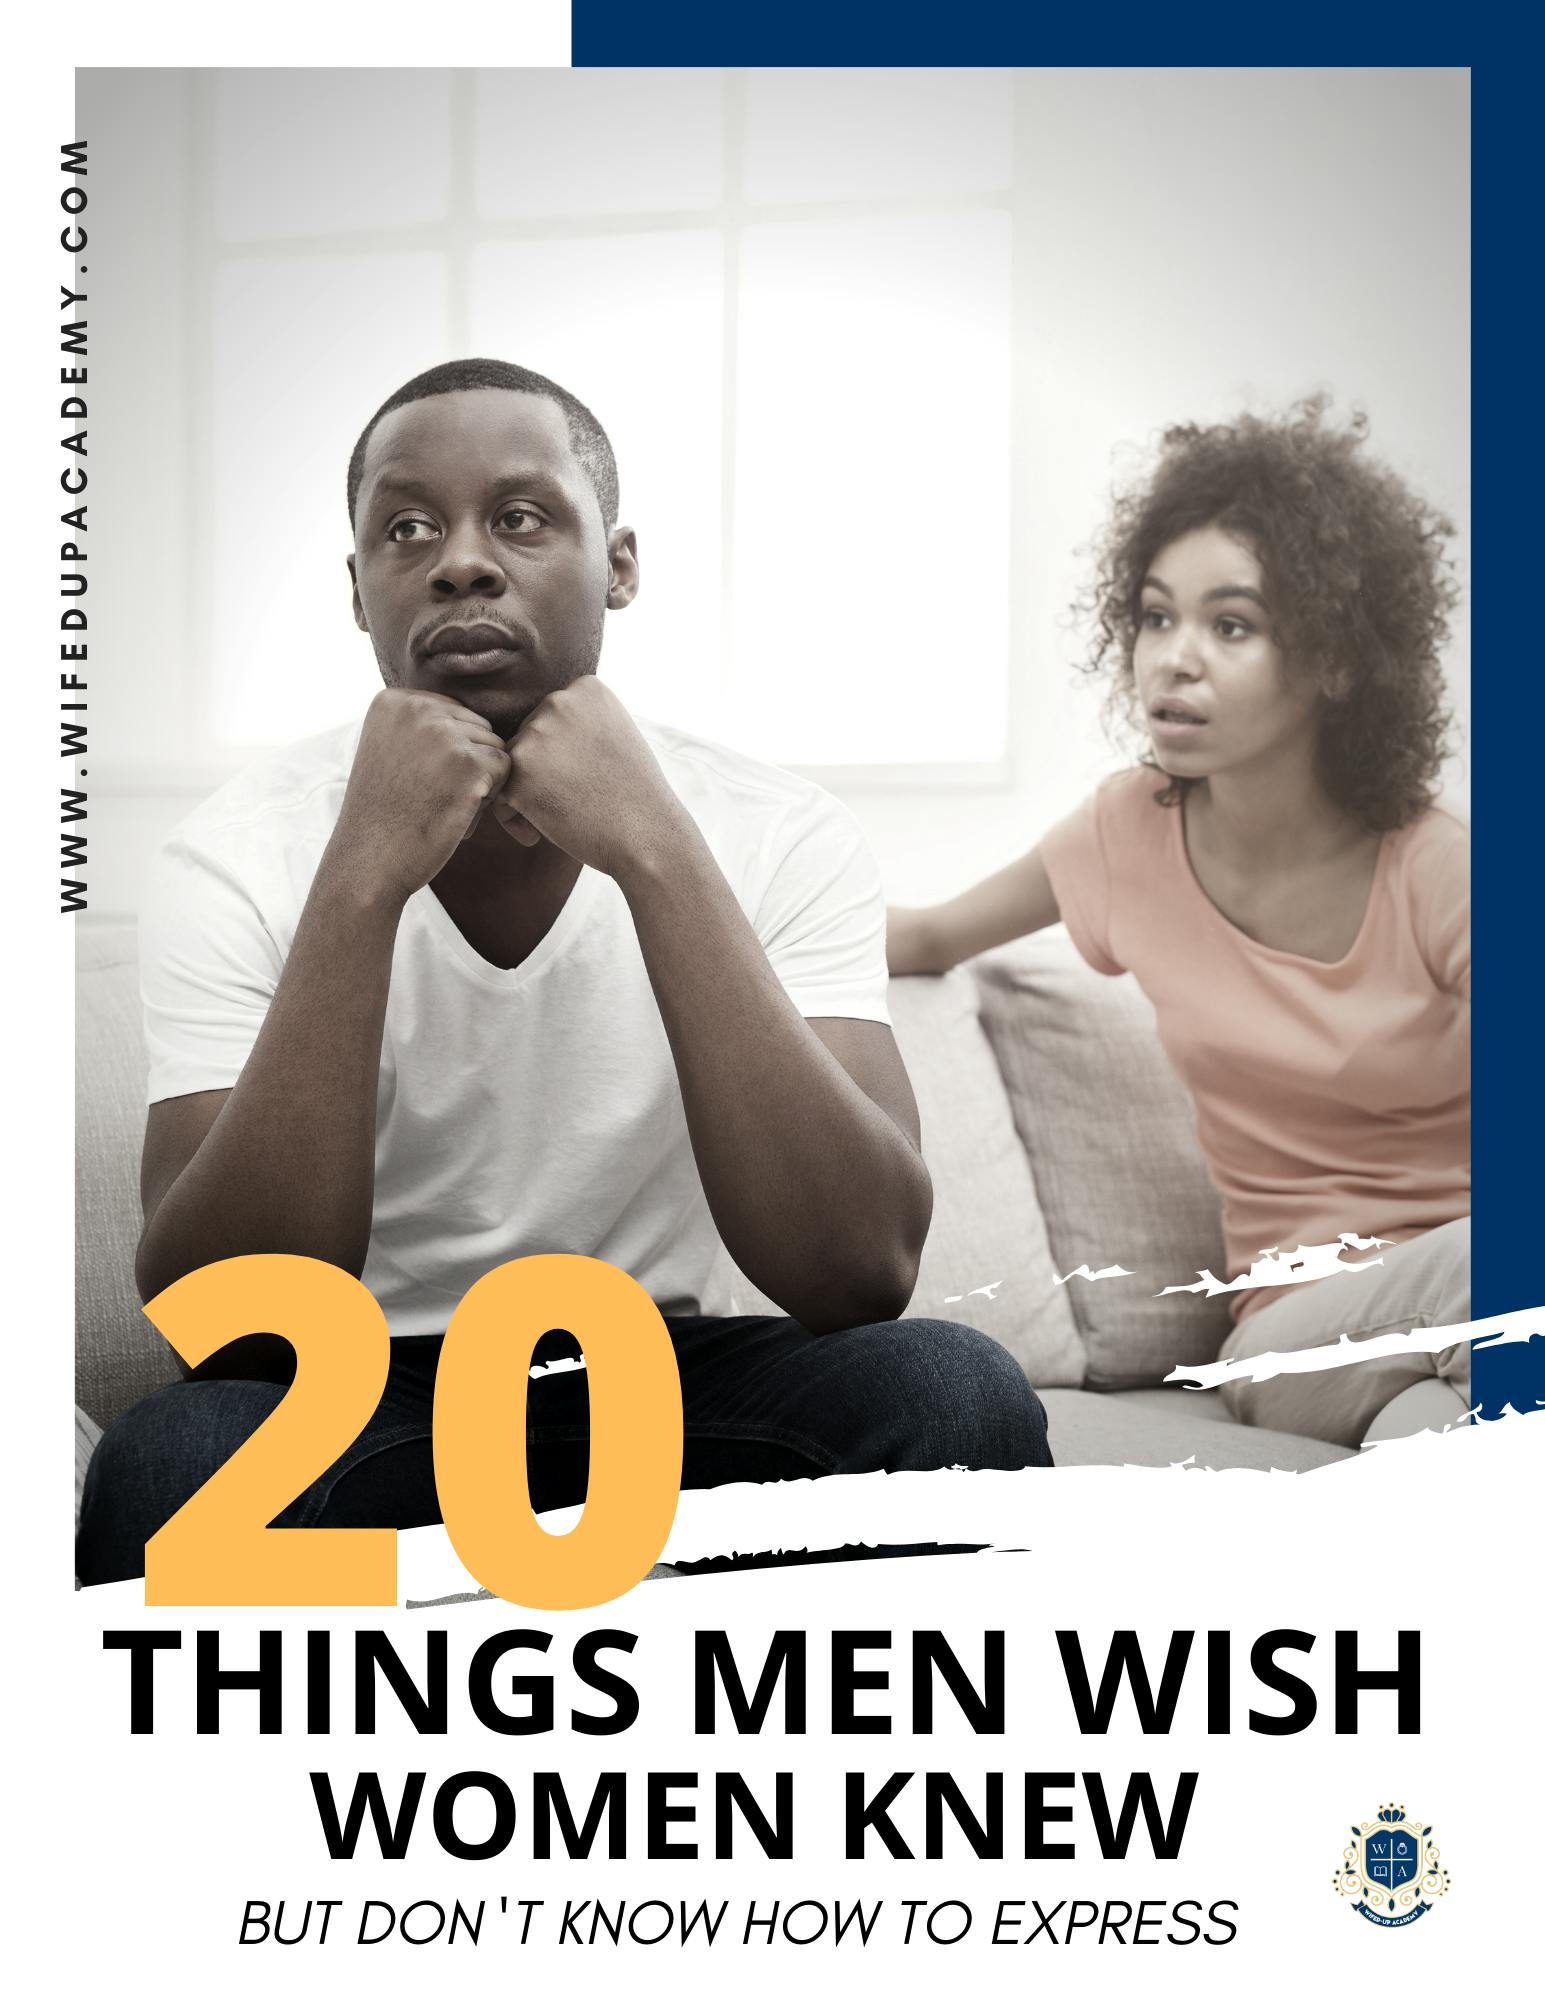 What do men think about most